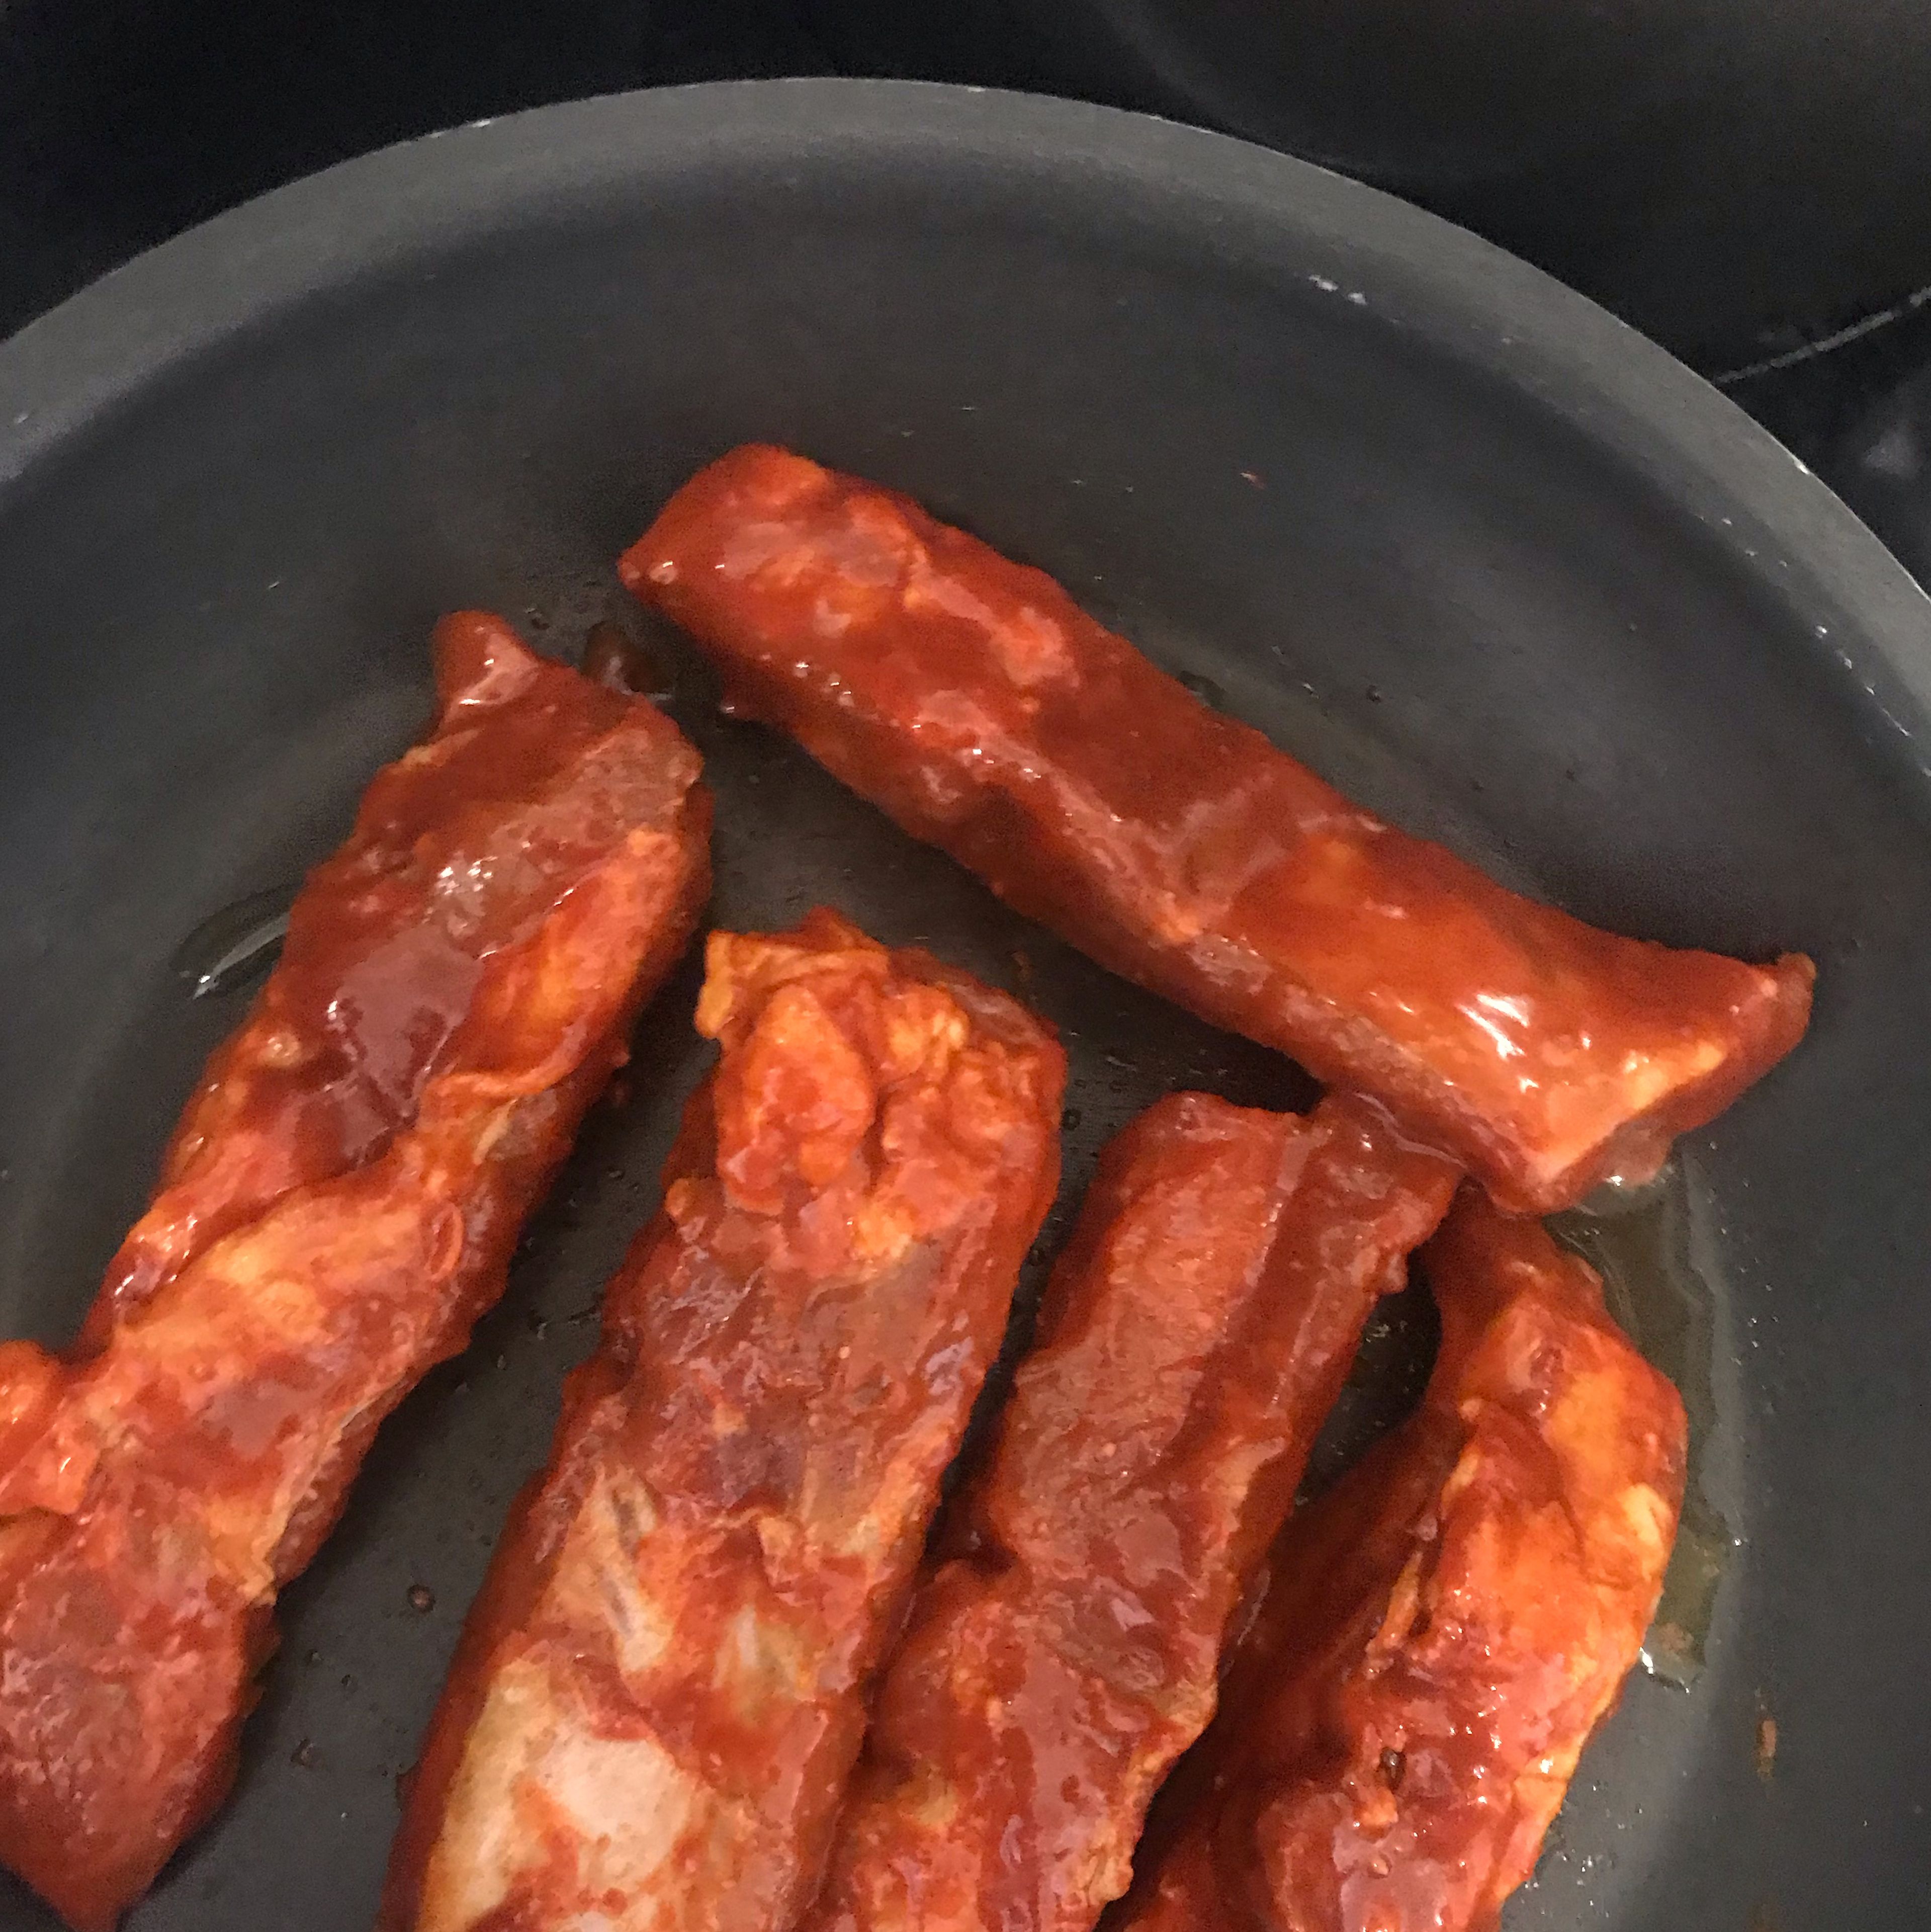 Add some oil in the pan and cook through the pork ribs. Then wipe the excess oil